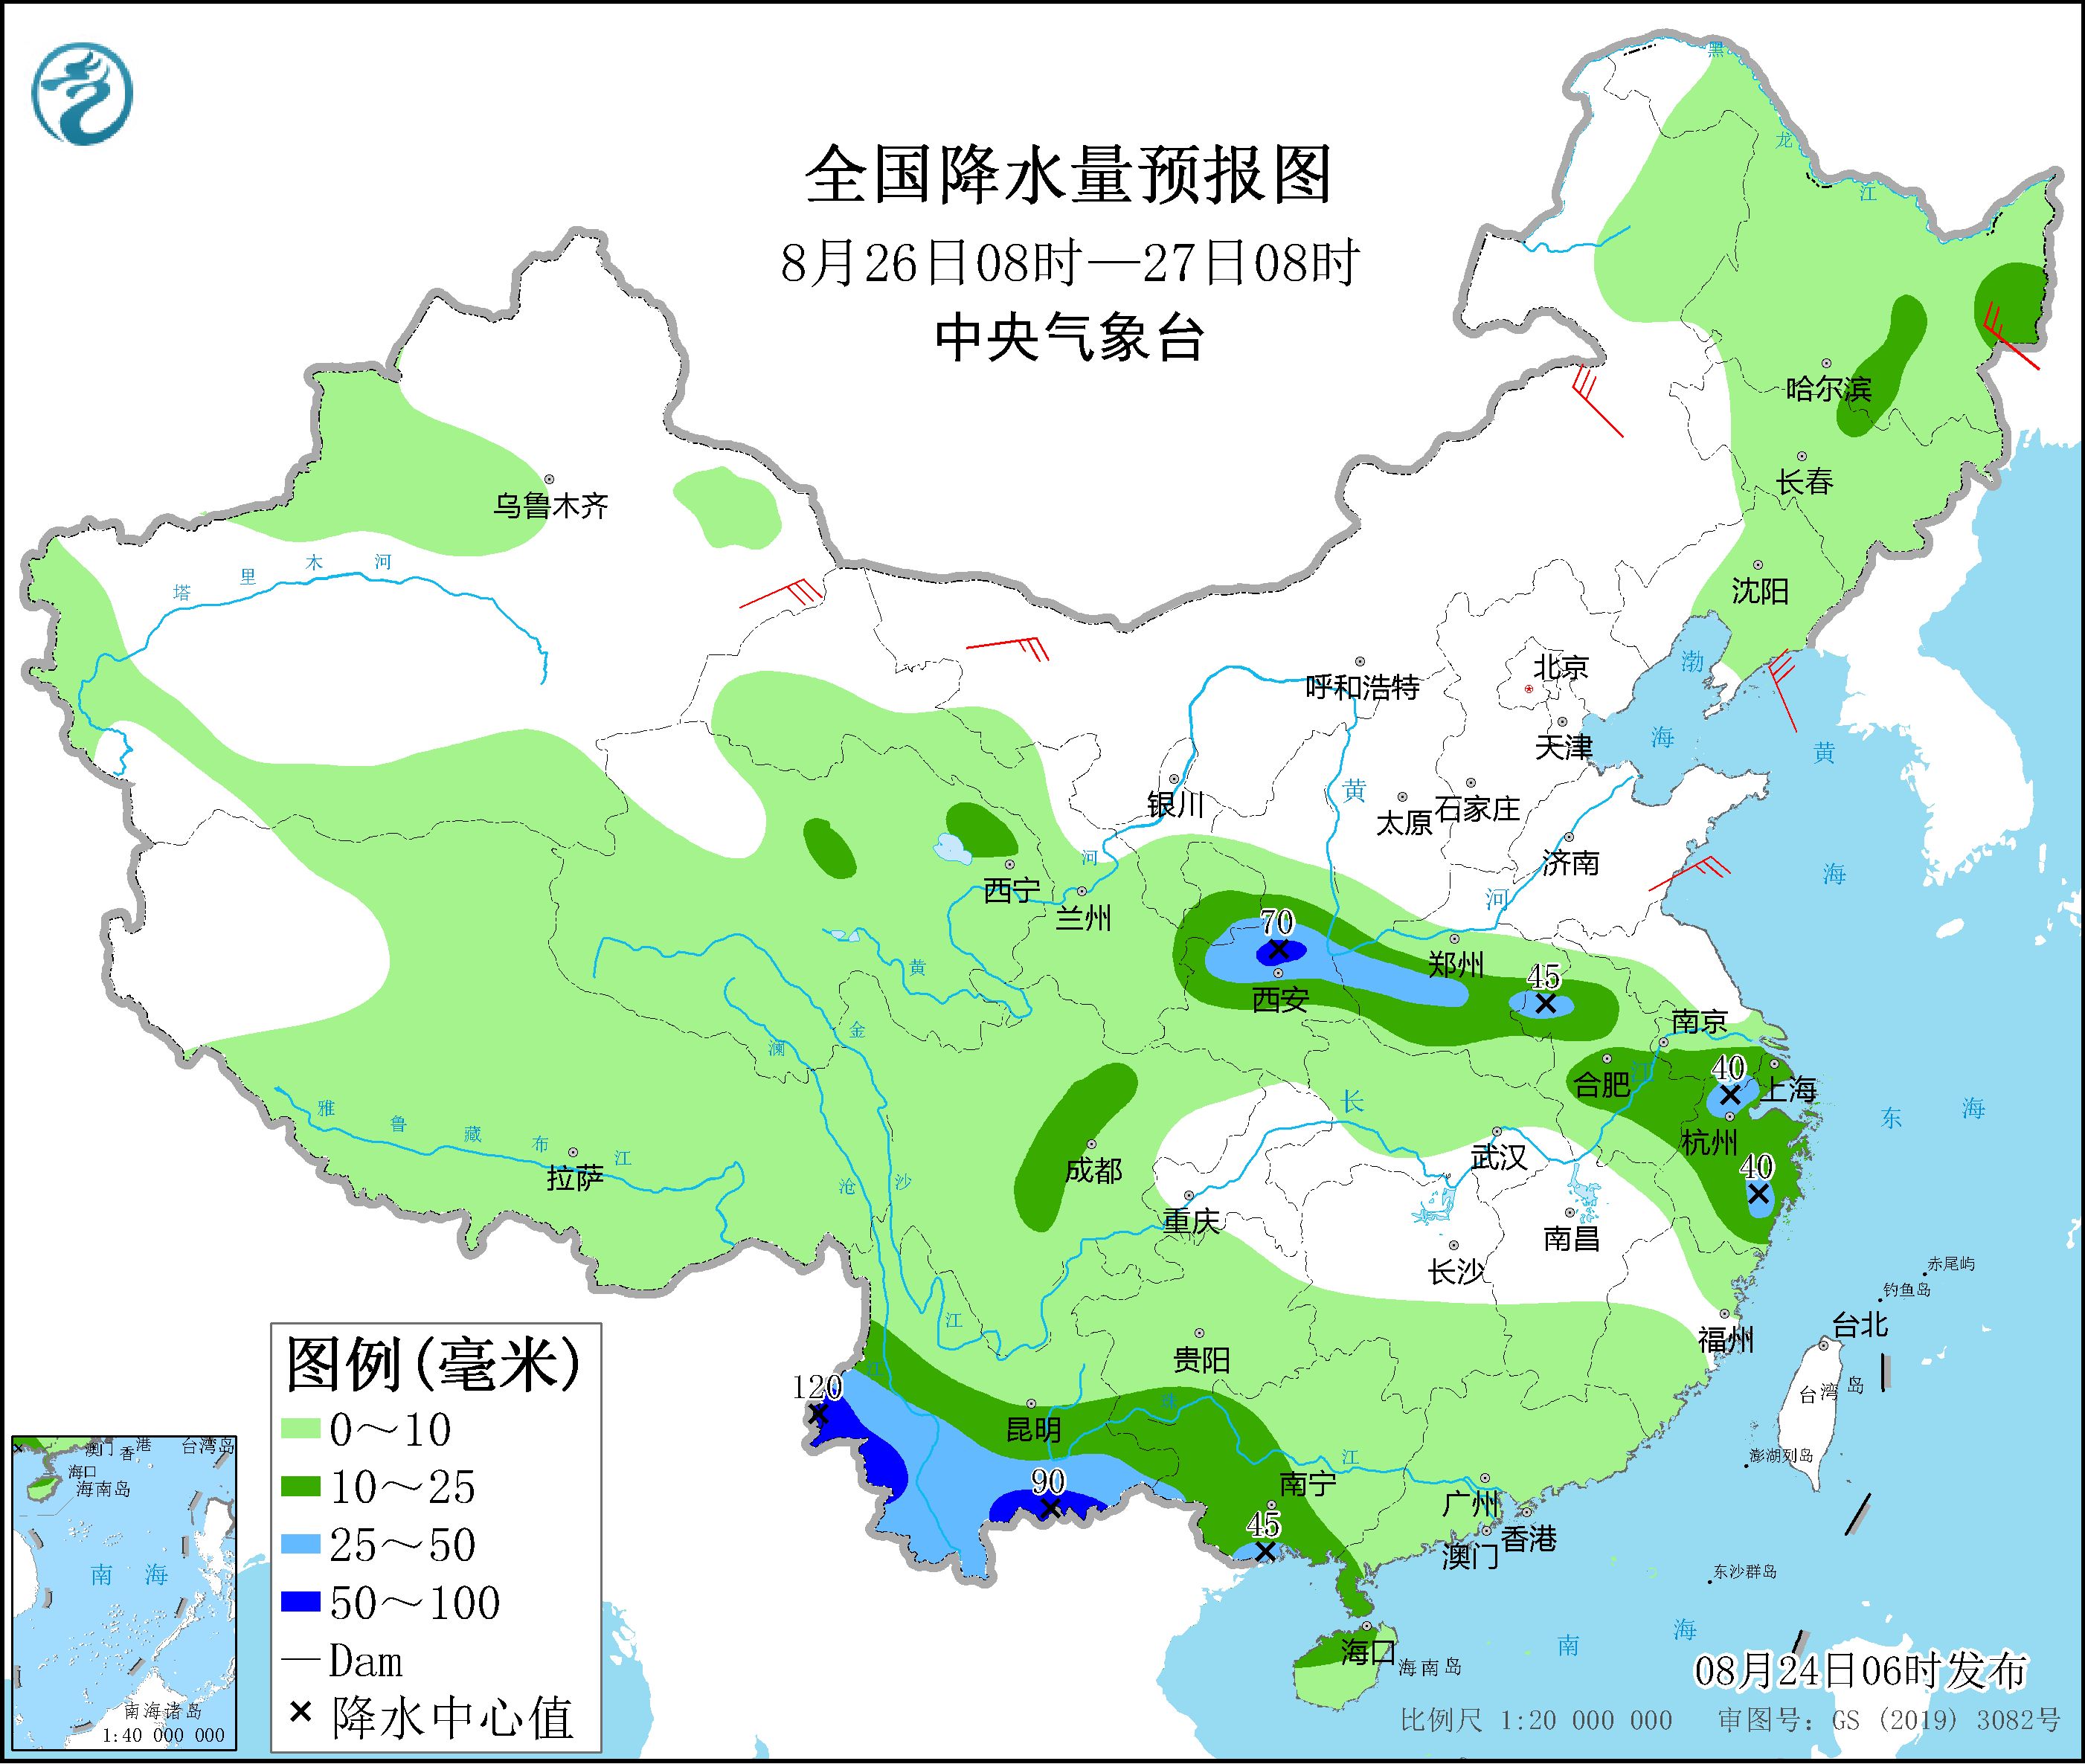 There is still more precipitation in eastern Northwest China, northern China and other places, and the 